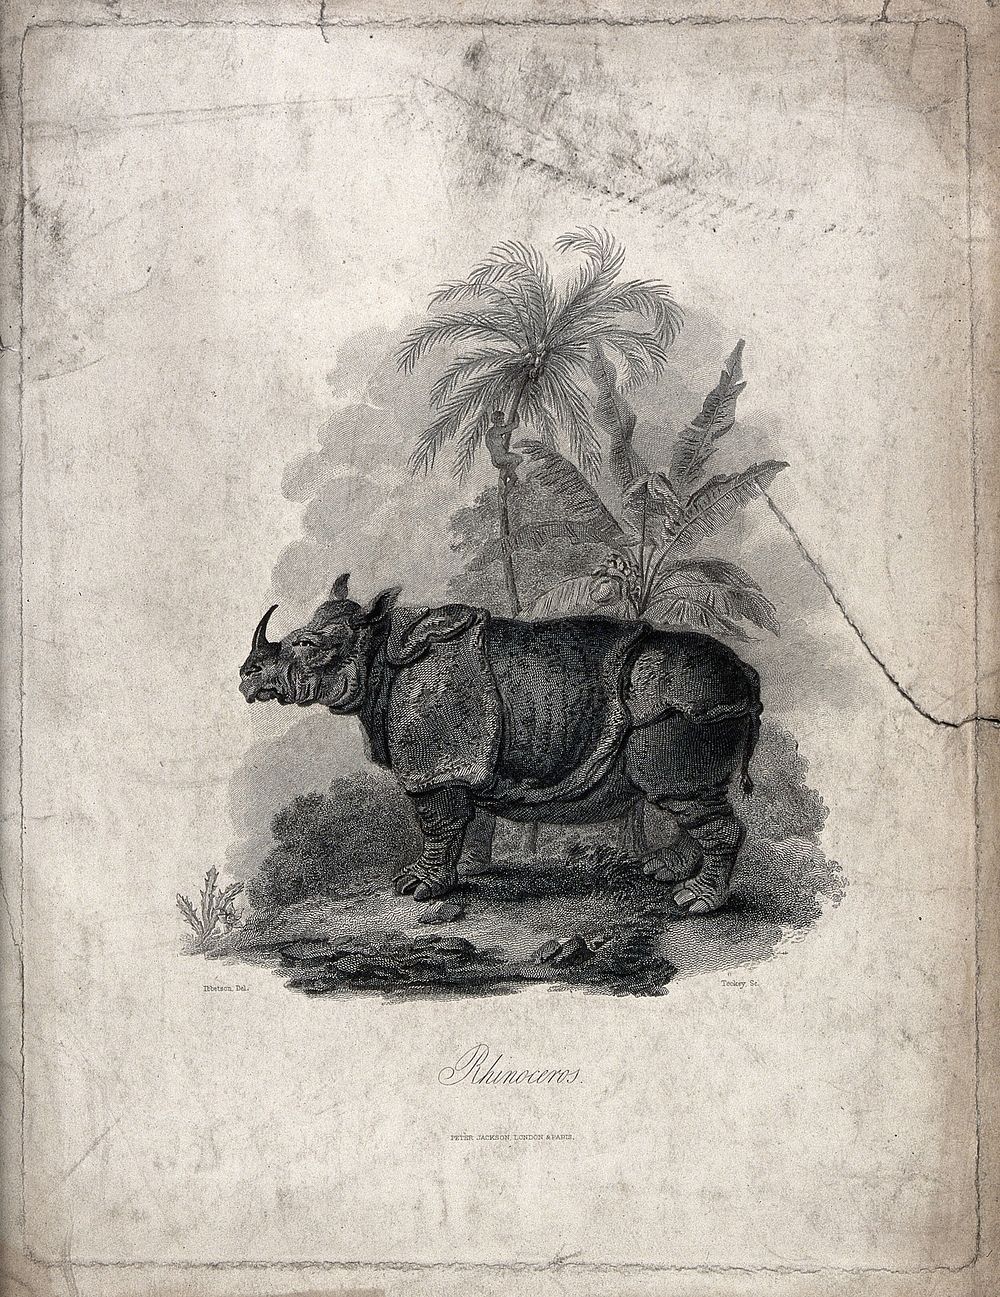 A rhinoceros standing before palmtrees and a banana plant. Line engraving by J. Tookey after J. C. Ibbetson.